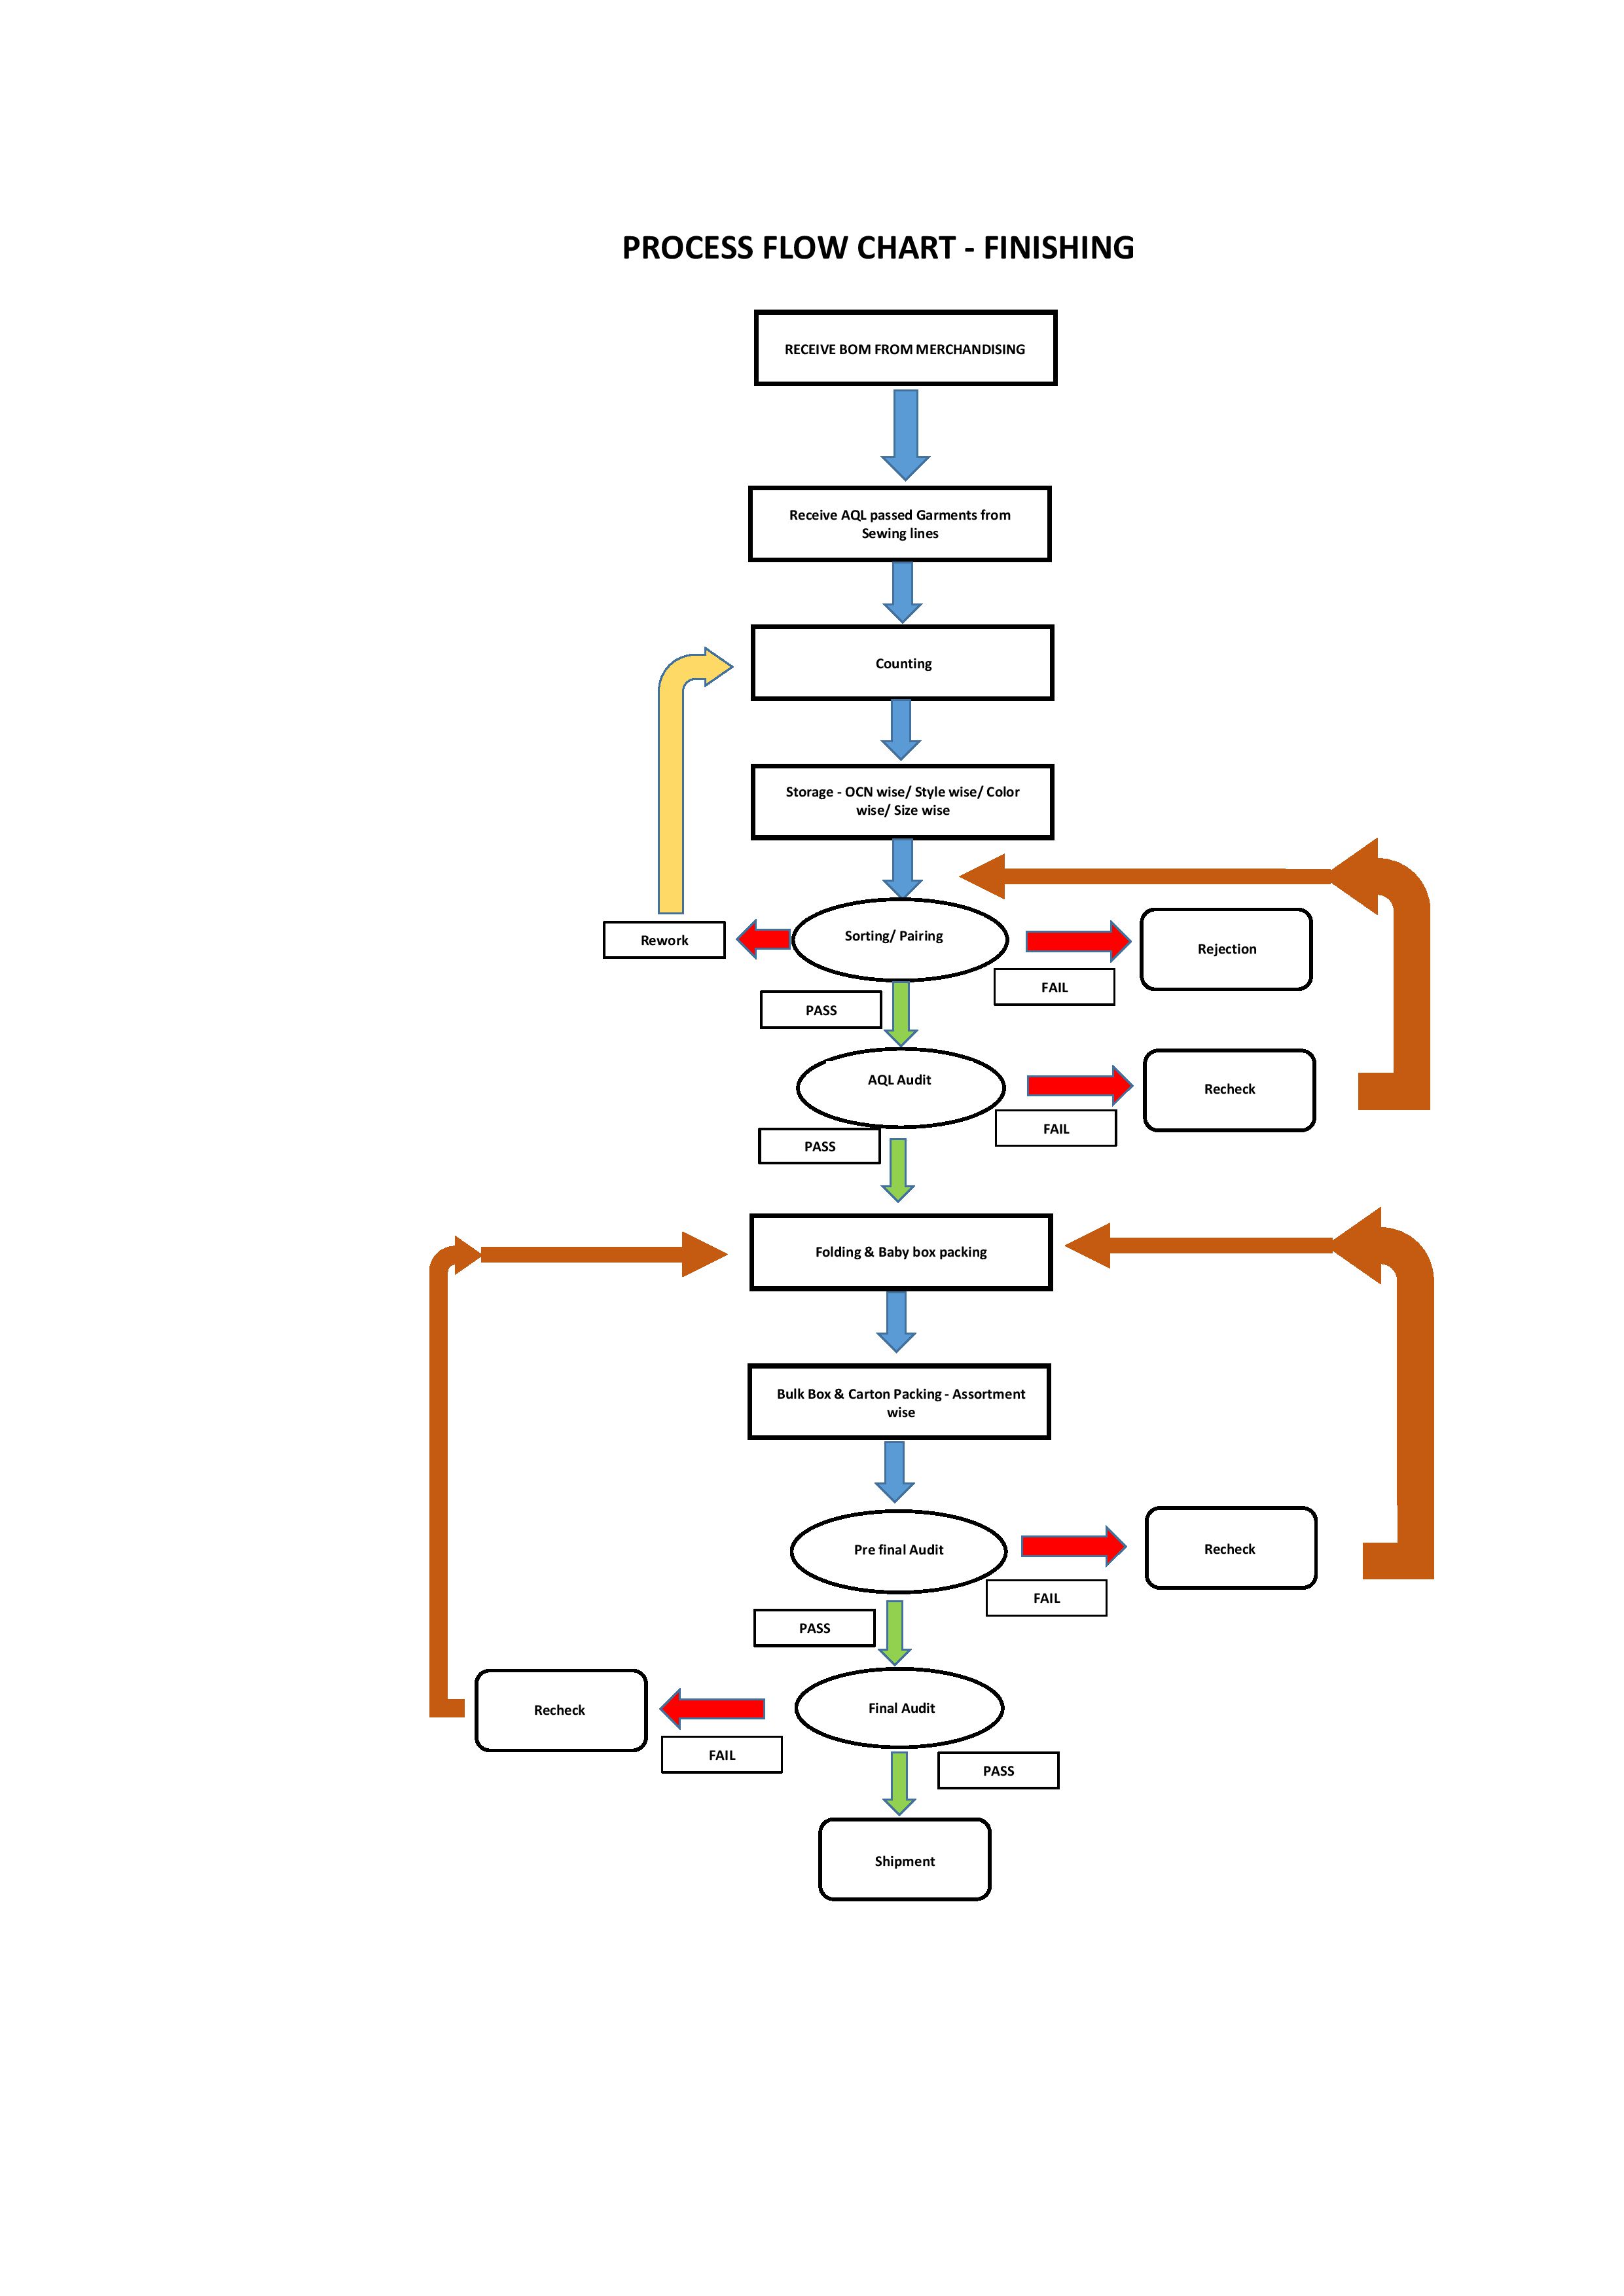 Processing Flow Chart : Finidhing